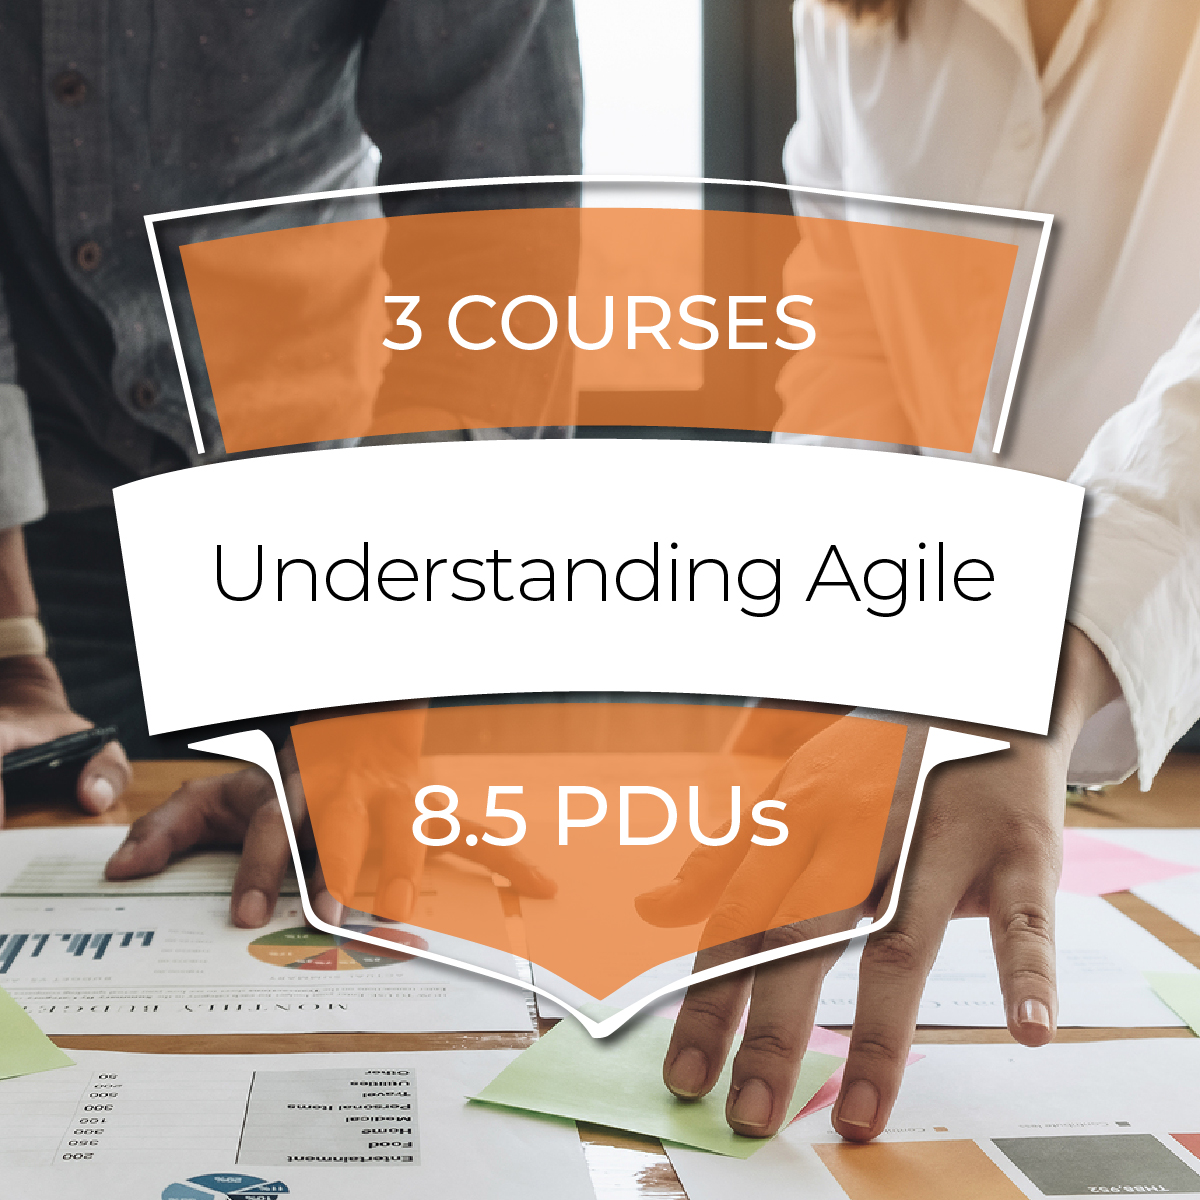 A complete Agile bundle to help you understand Agile Fundamentals, Agile Scrum, and when Agile may not be the best tool for the job.